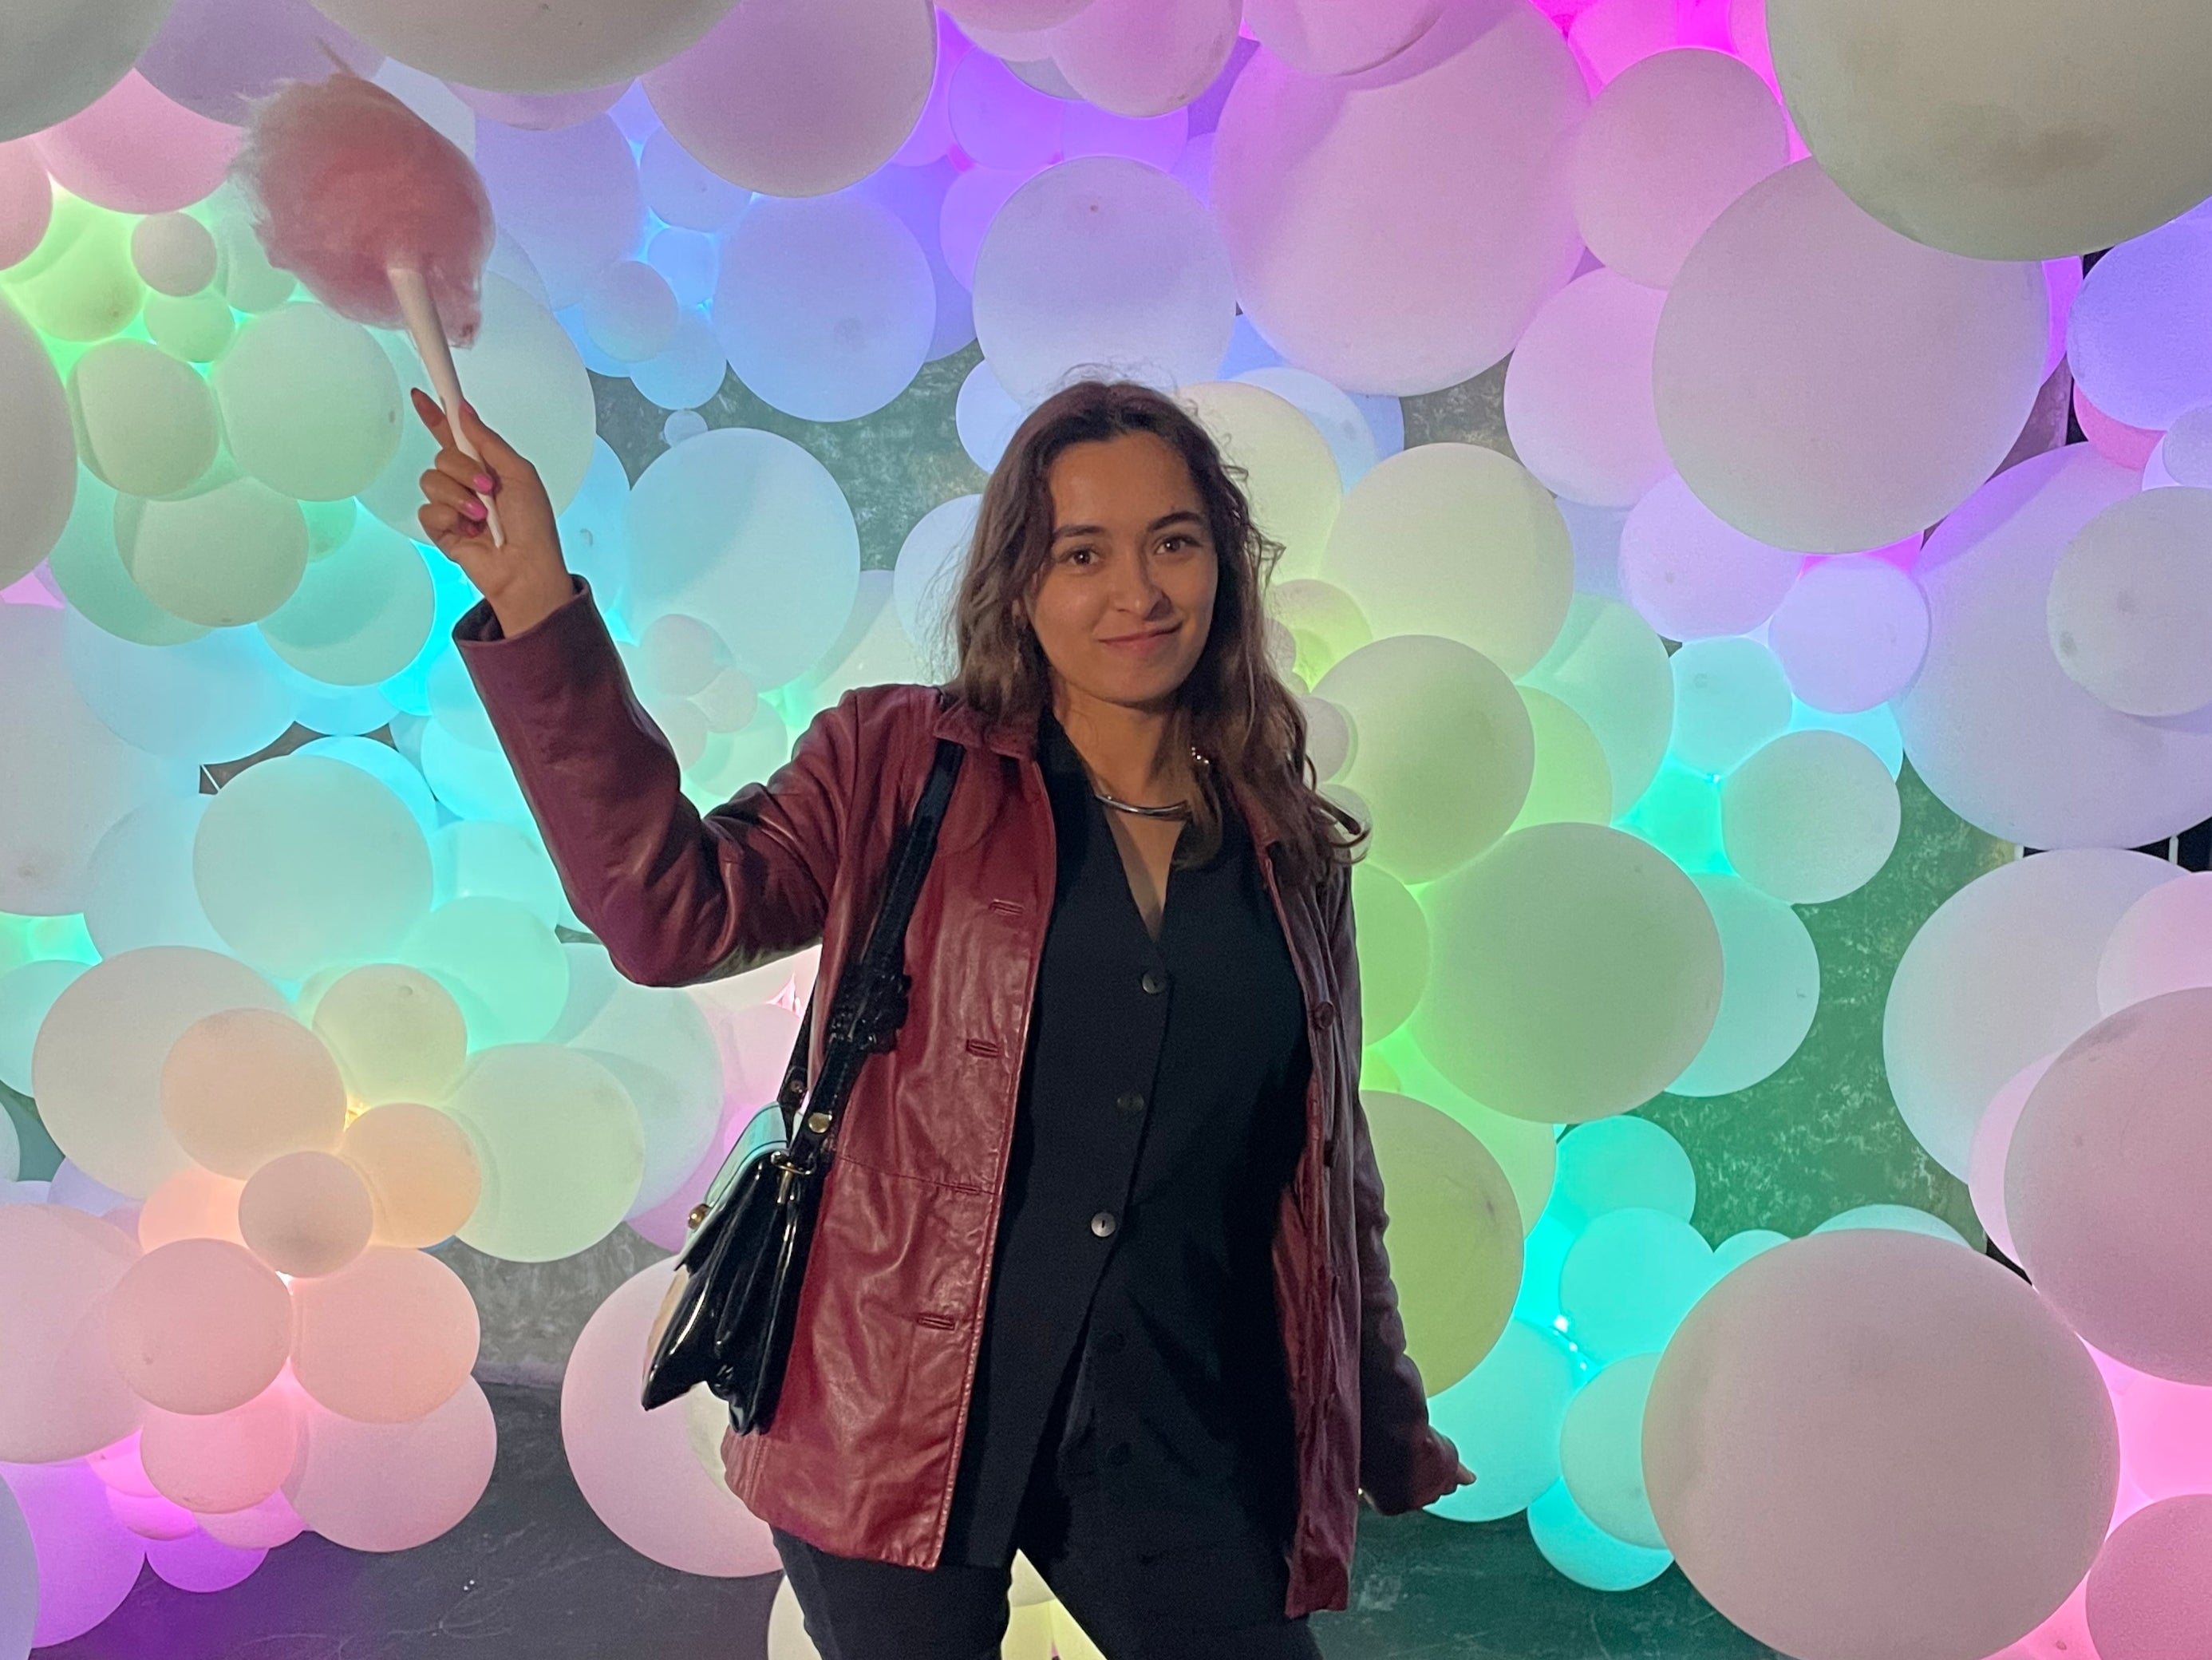 Olivia Hebert posing with cotton candy in front of Molly Balloons’ balloon art installation at the Willy Wonka Experience in Downtown Los Angeles, California on 28 April.